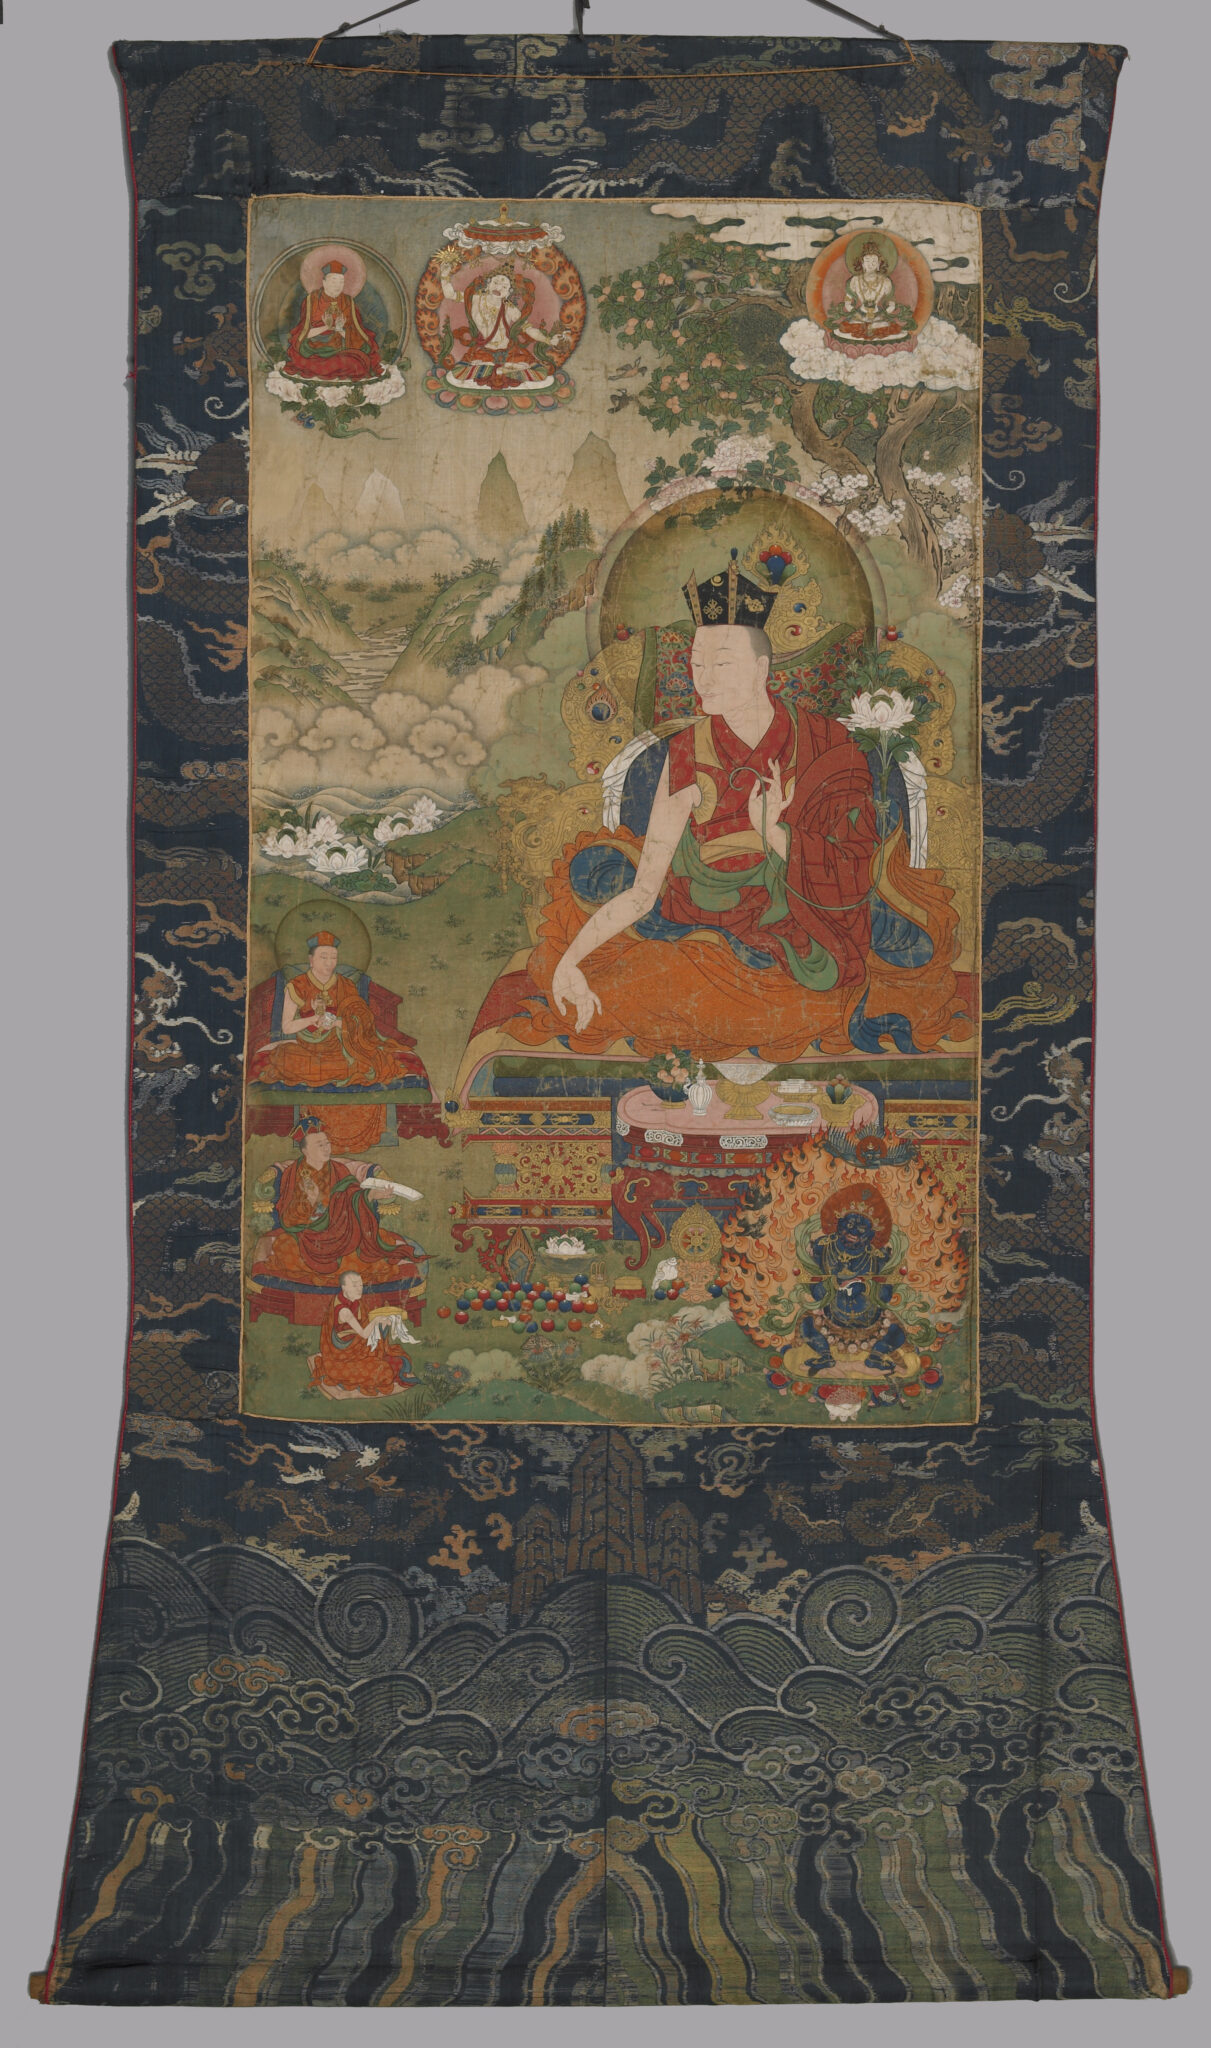 Painting, mounted on blue brocade featuring dragon motif, depicting lama seated before attendants in mountain landscape